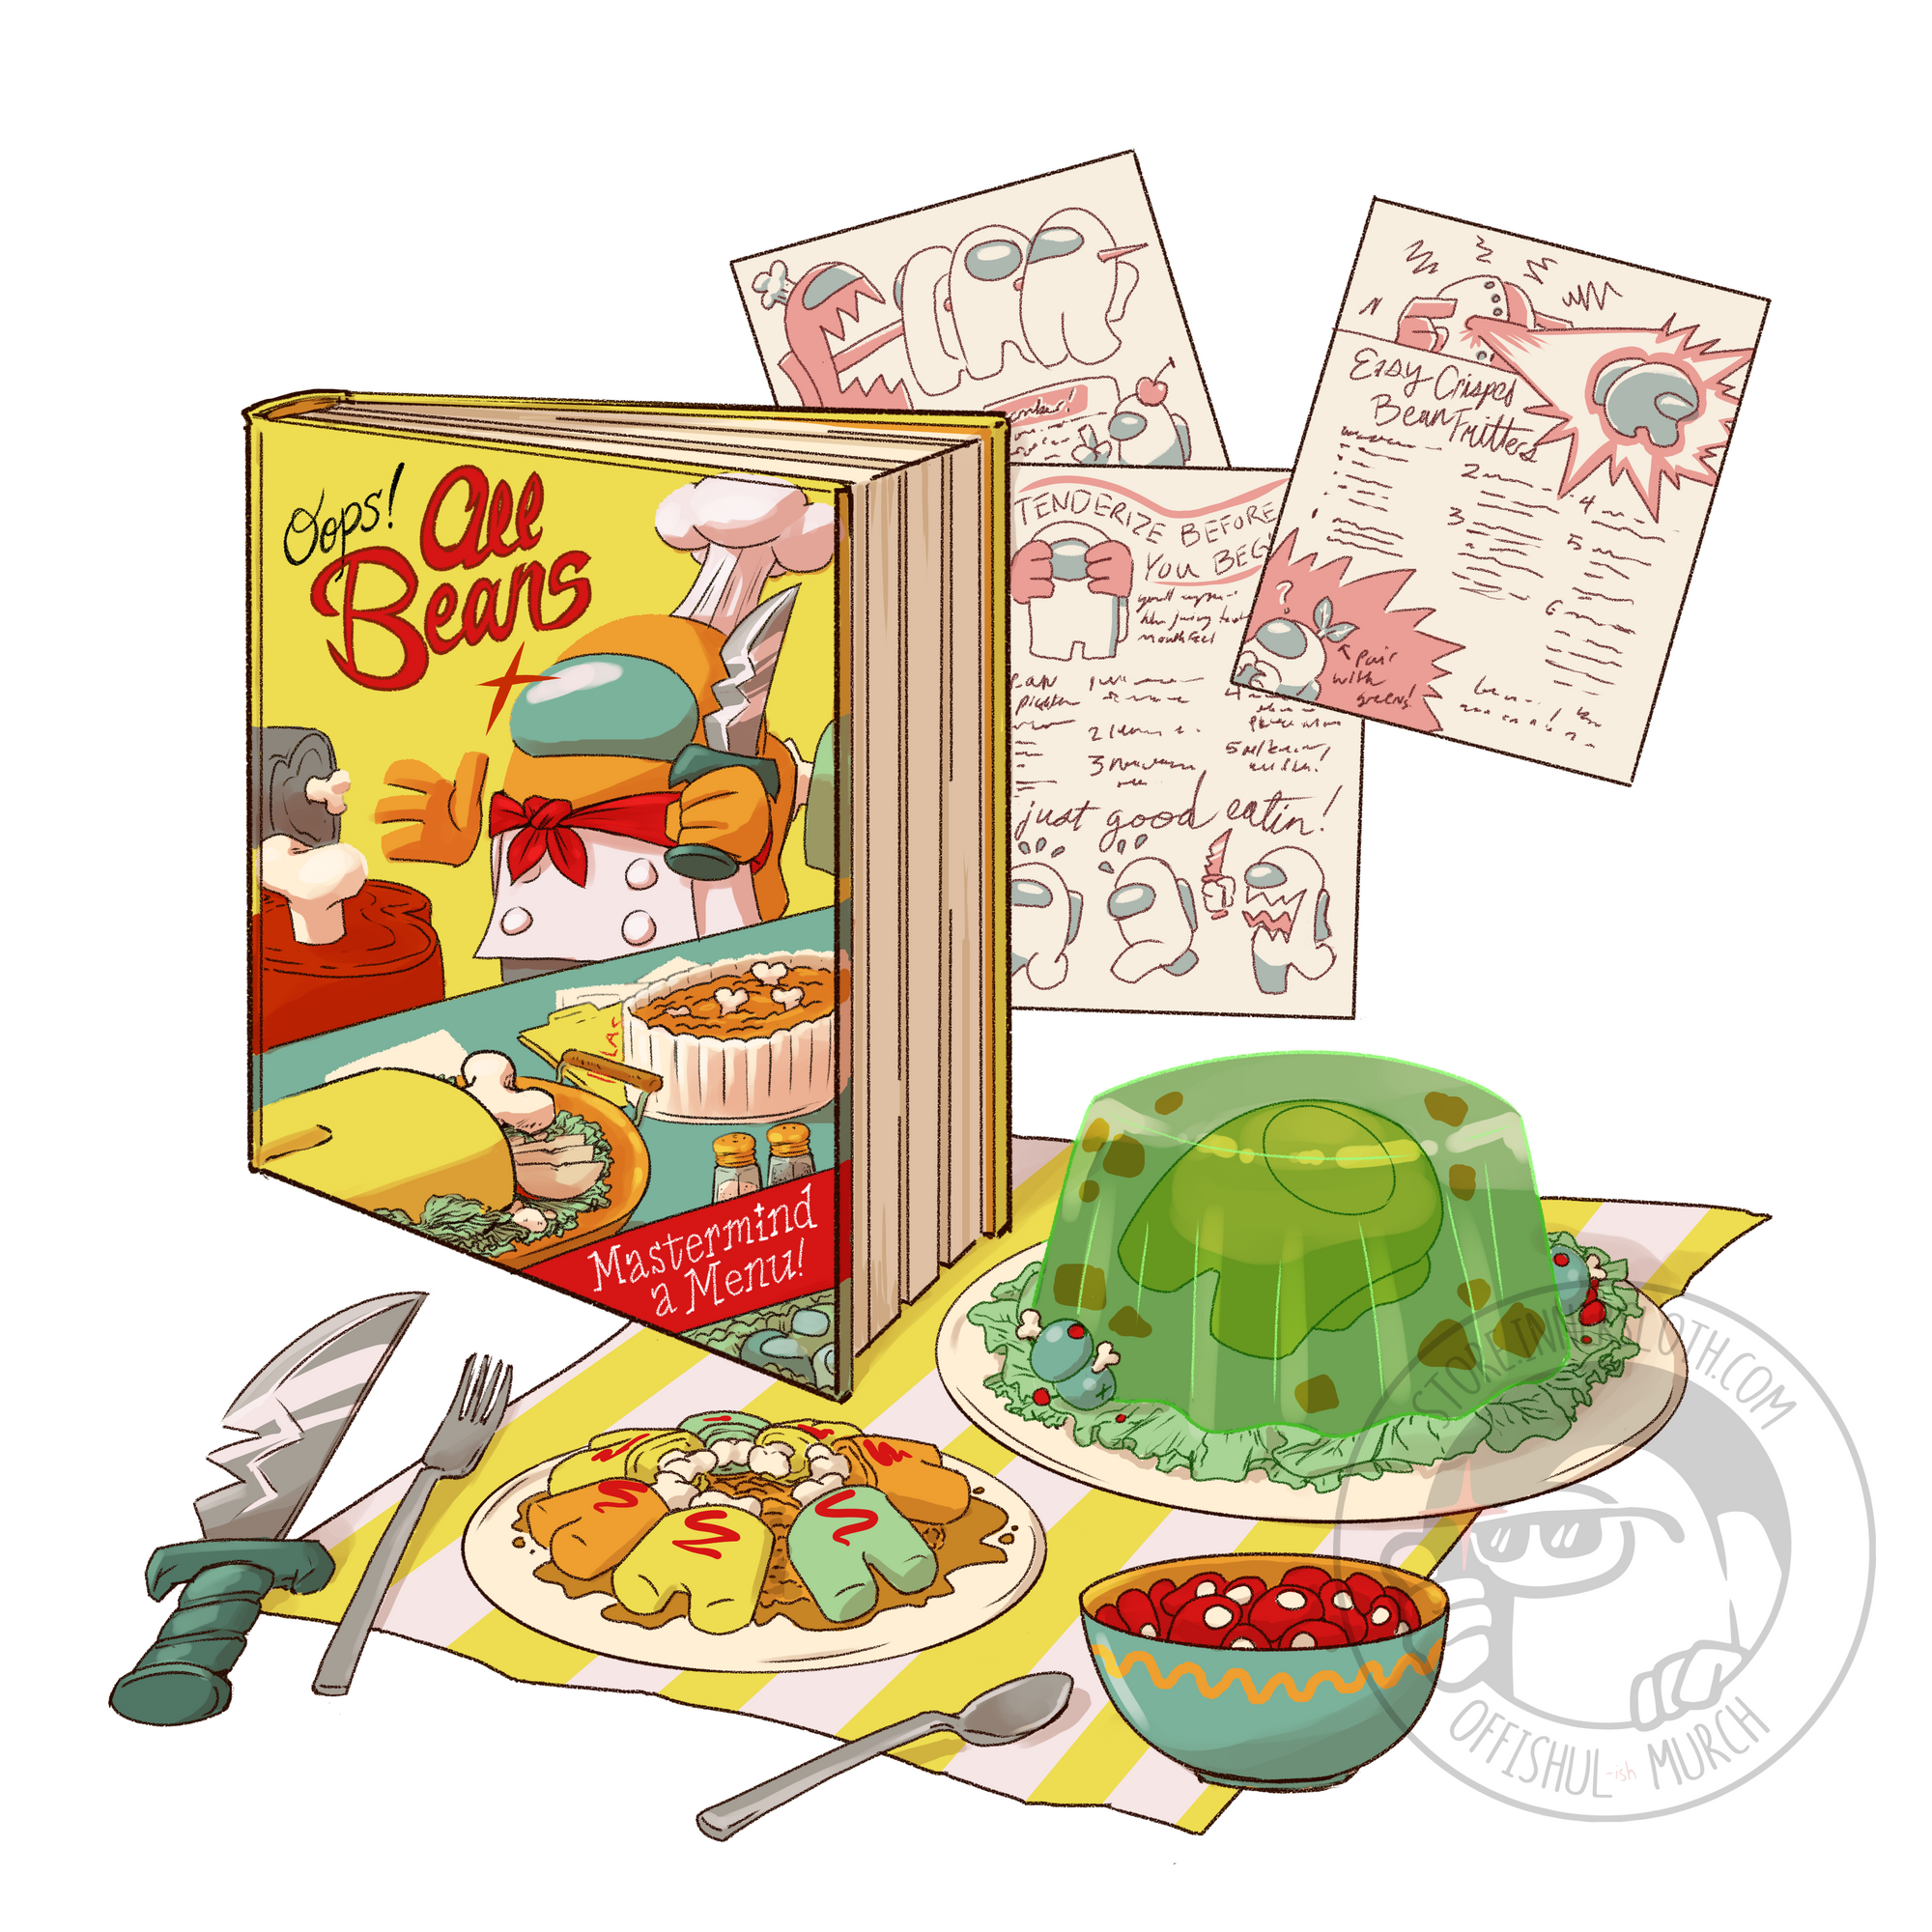 A composite illustration Katie McDermott of a dead Crewmate-style feast. There's a yellow cookbook that says "Oops! All beans, Mastermind a Menu." The cover has an Orange Impostor chef holding a knife. There are three cookbook pages behind the book depicting different ways to cook Crewmates. At the center and bottom of the image, are several food items, like a Crewmate suspended in jello and a bowl full of beans, laid out on a yellow and white checkered tablecloth surrounded by cutlery and one big dagger.